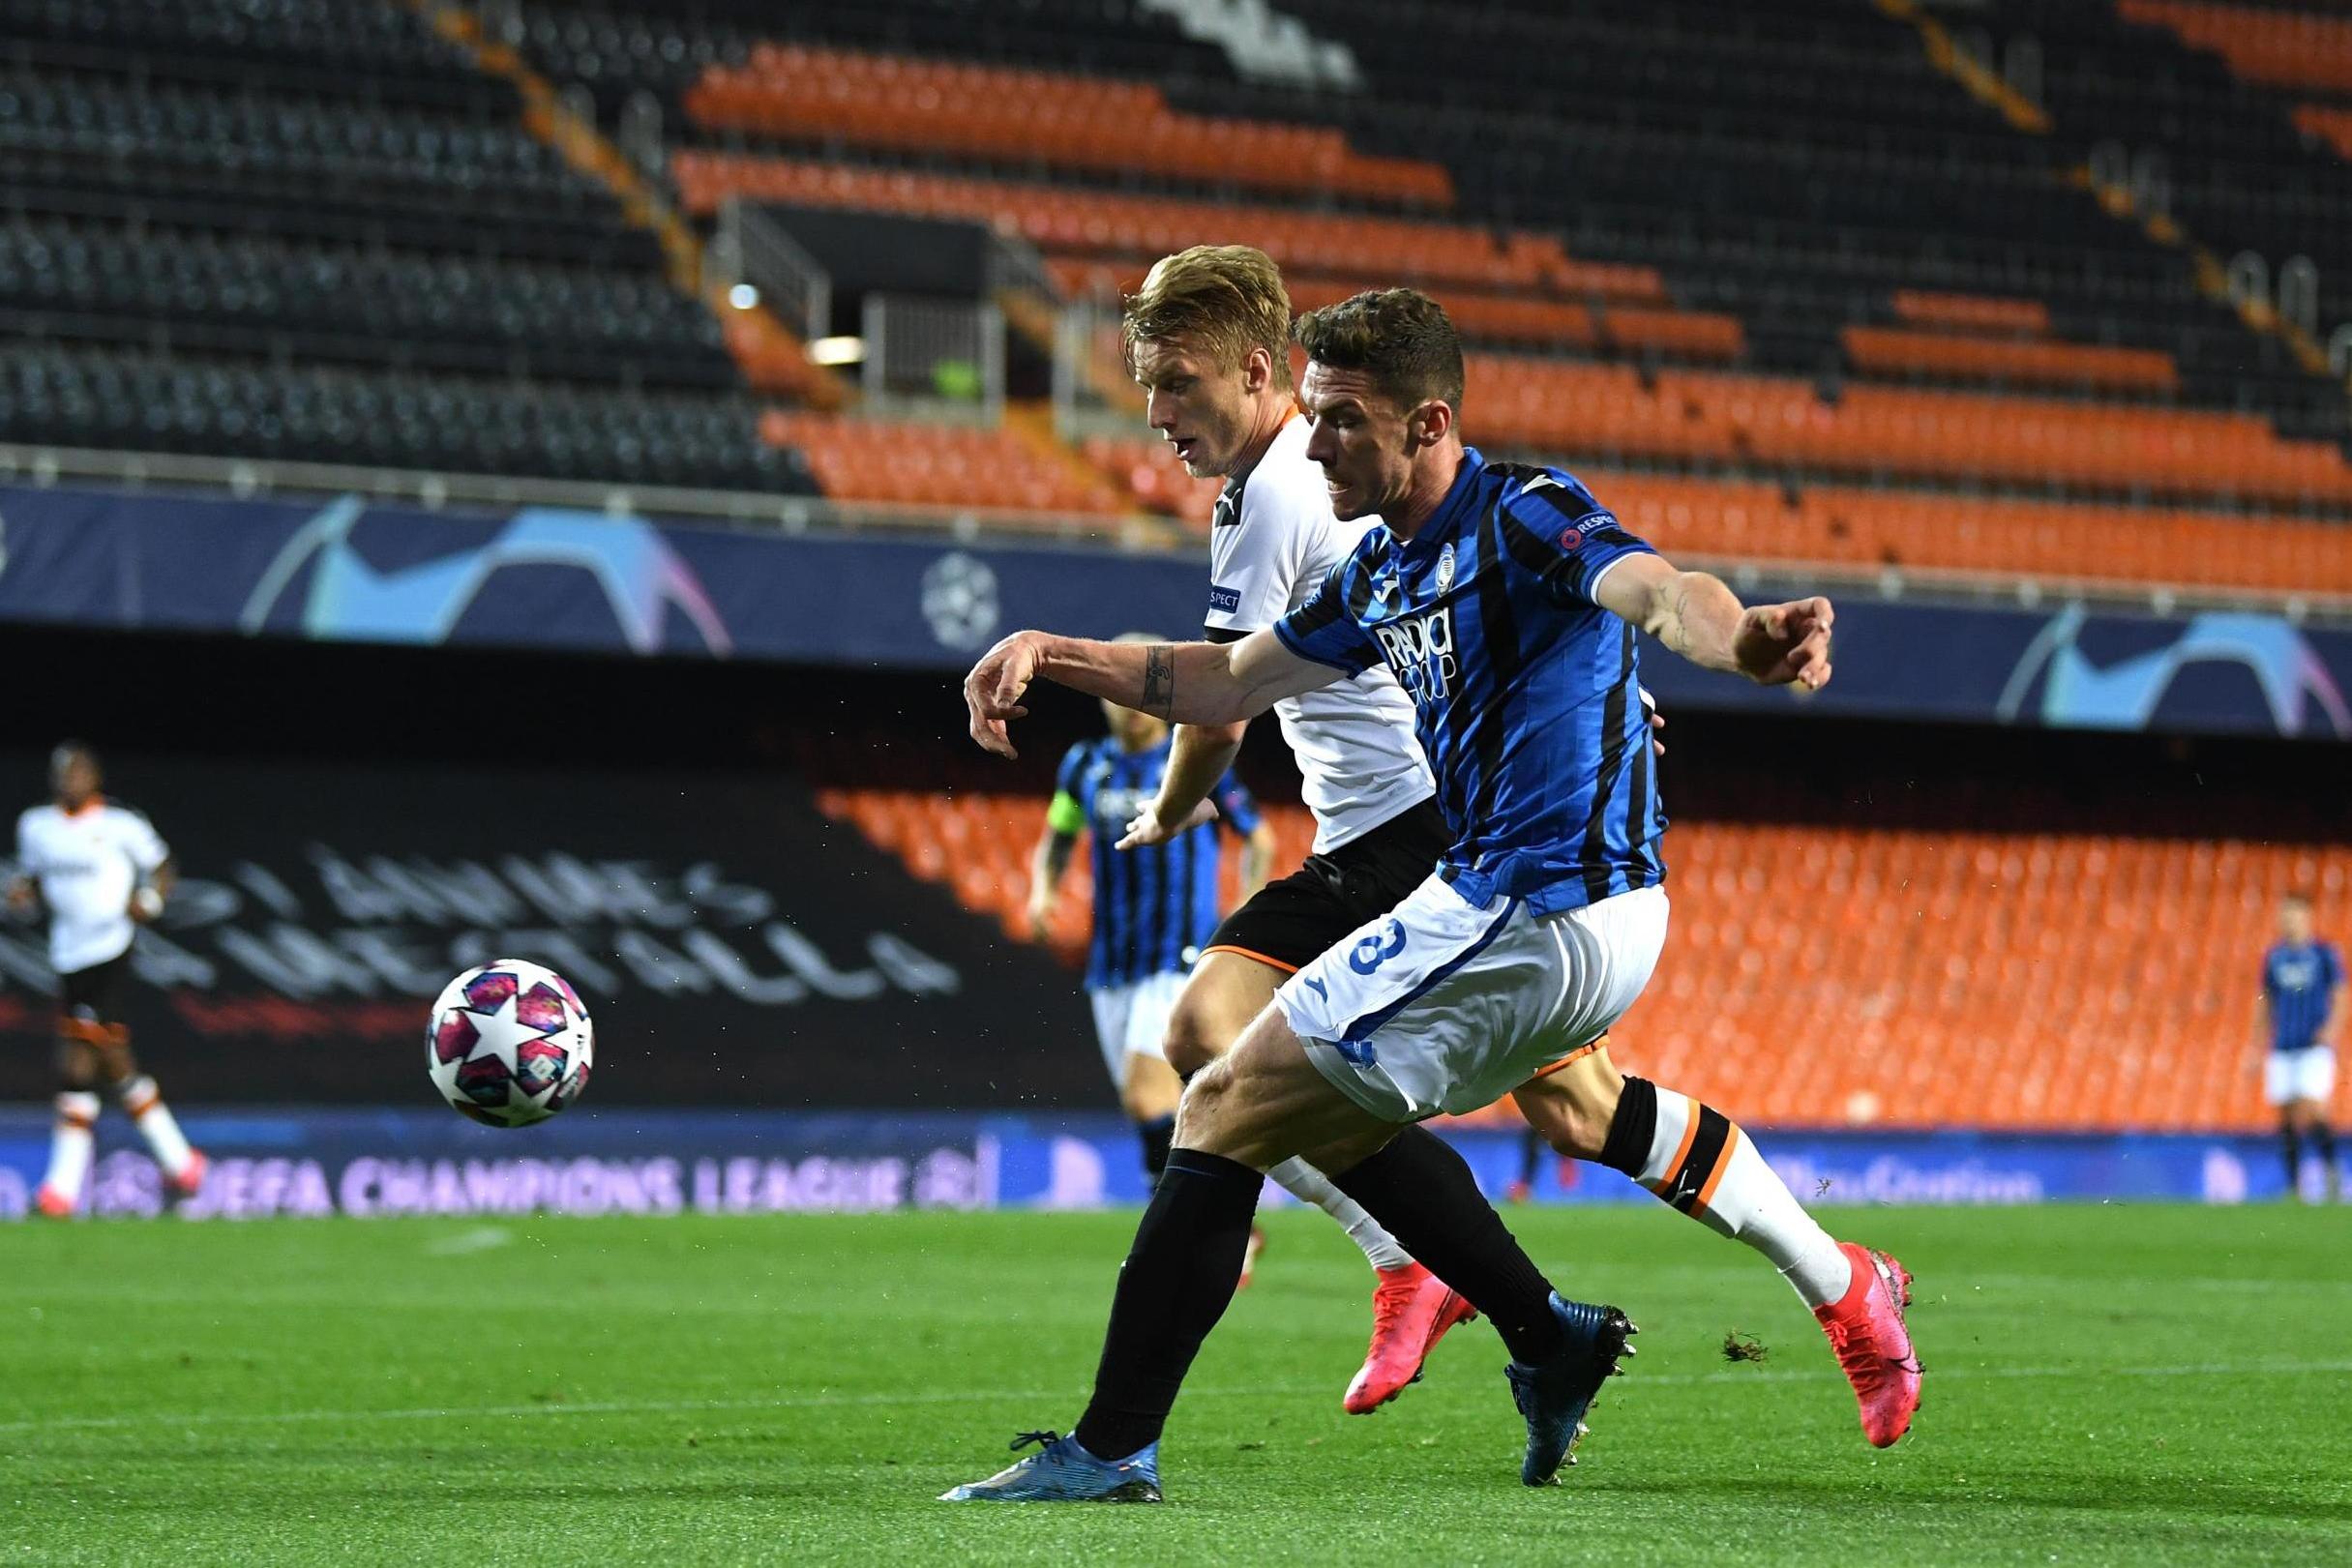 atalanta-wins-against-valencia-in-ucl-round-of-16-second-leg-2019-2020